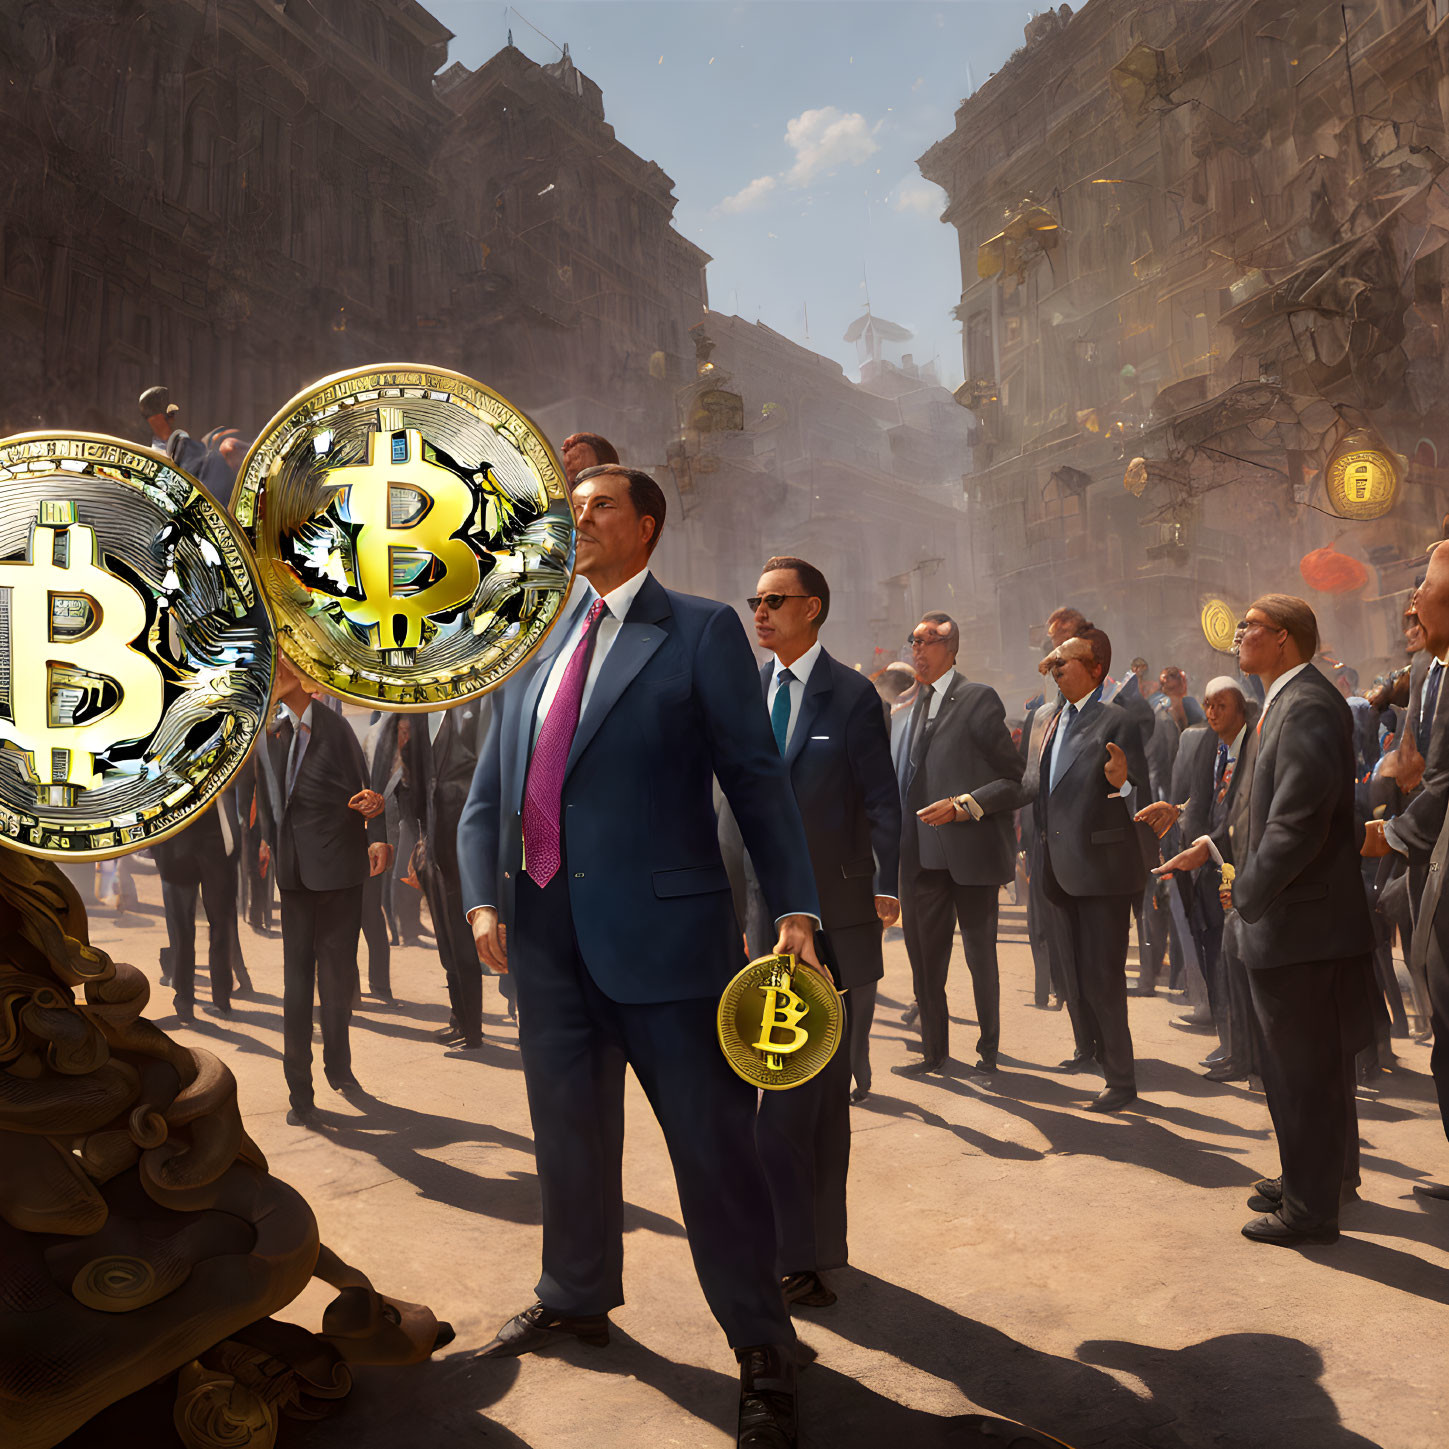 Businessmen in Suits with Bitcoin Symbols in City Square